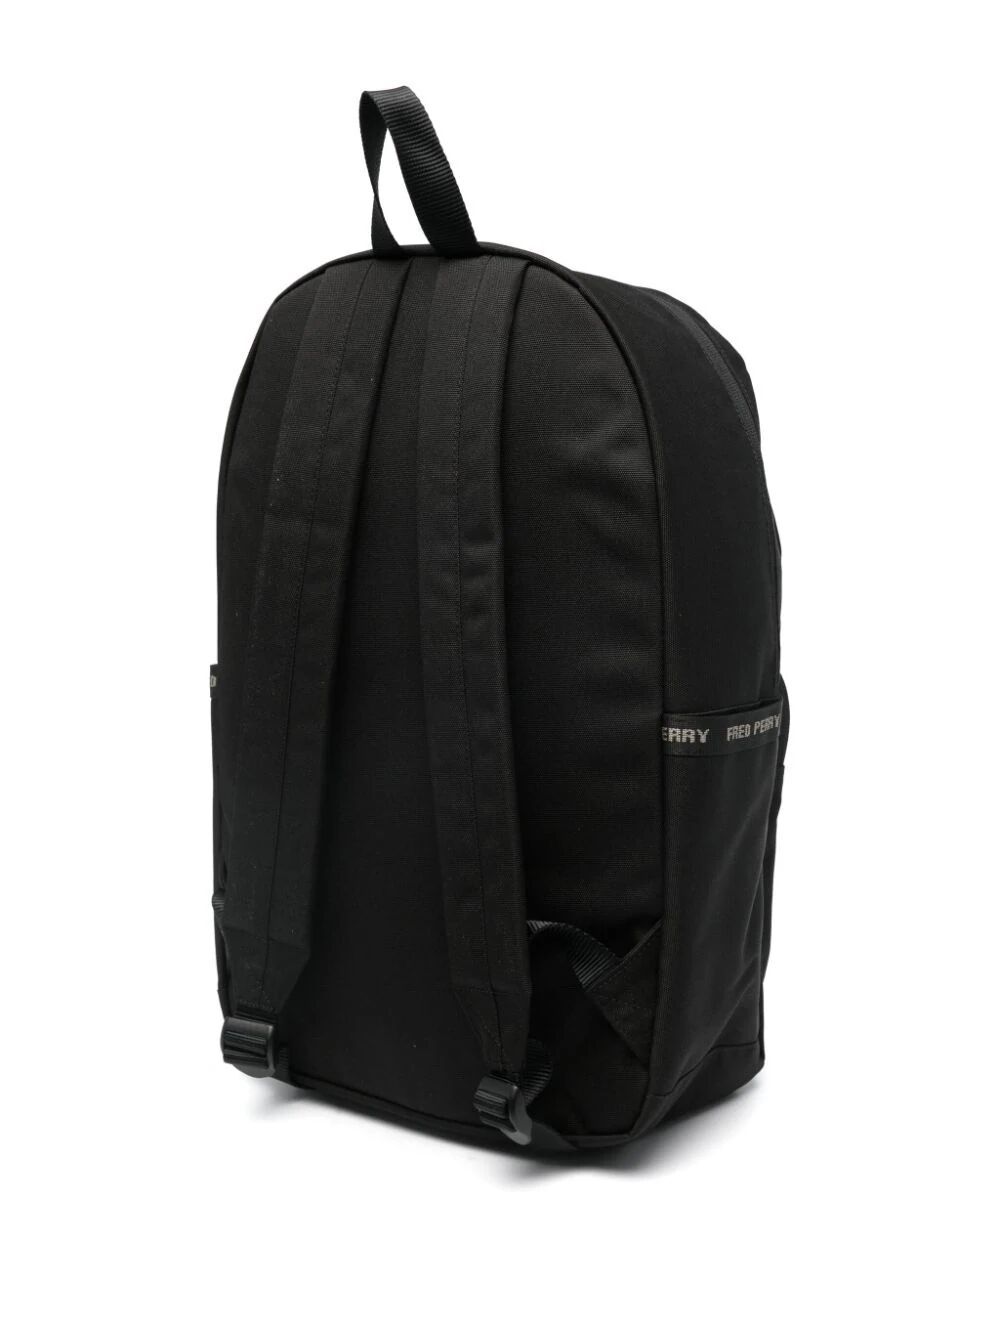 Shop Fred Perry Fp Taped Backpack In Black